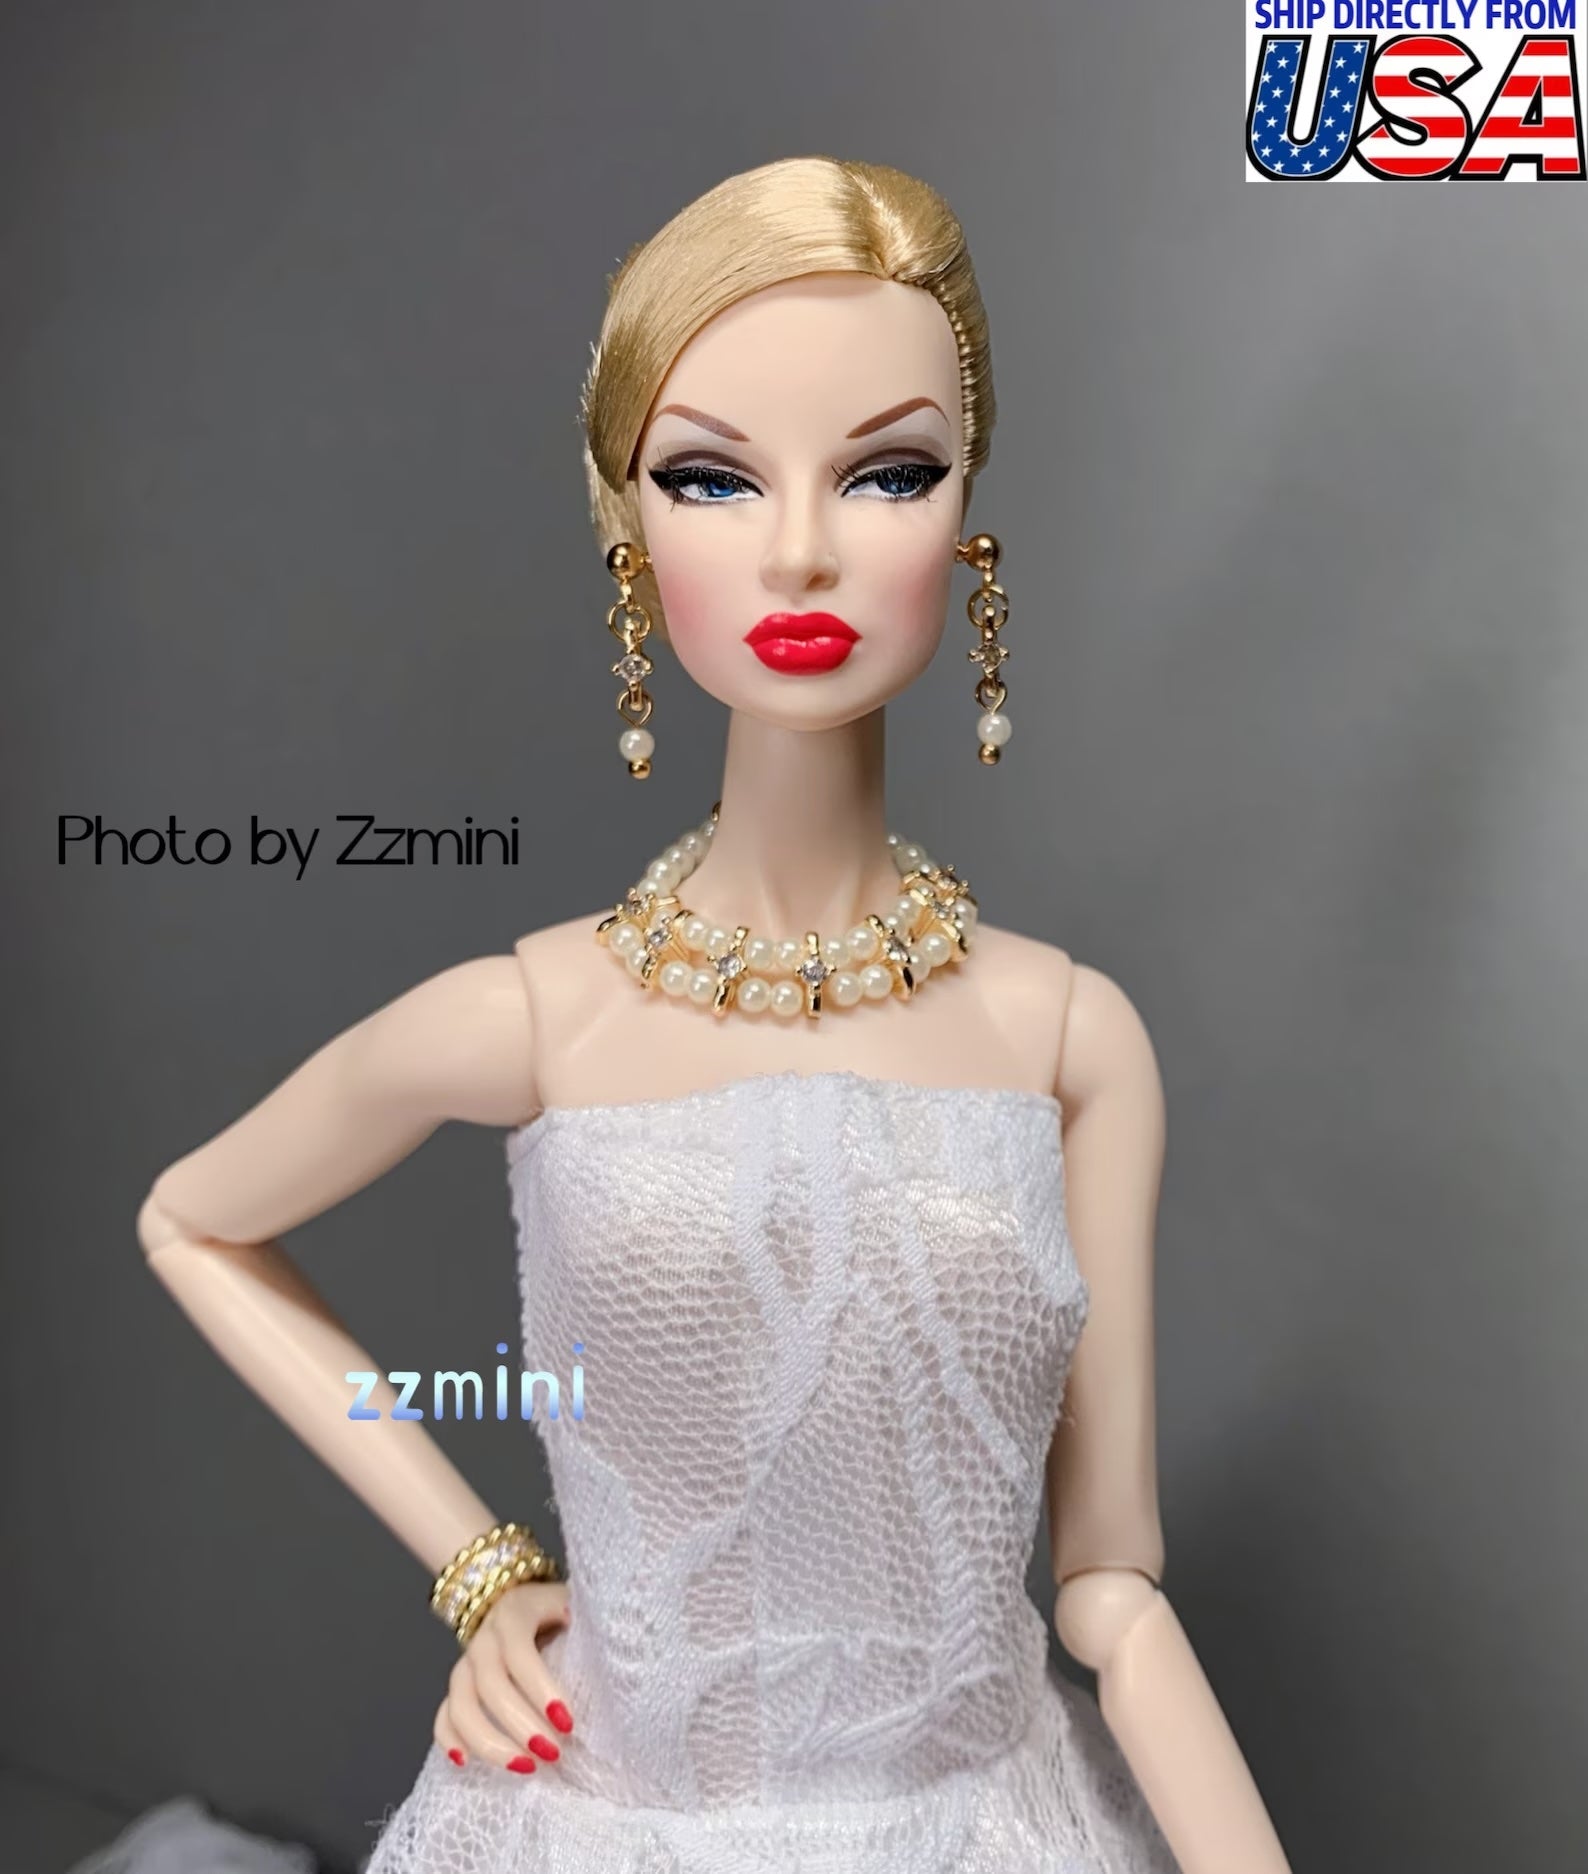 4PCS Handmade Fashion Doll Jewelry Rhinestones Earring Necklace And Bracelet Set Accessories